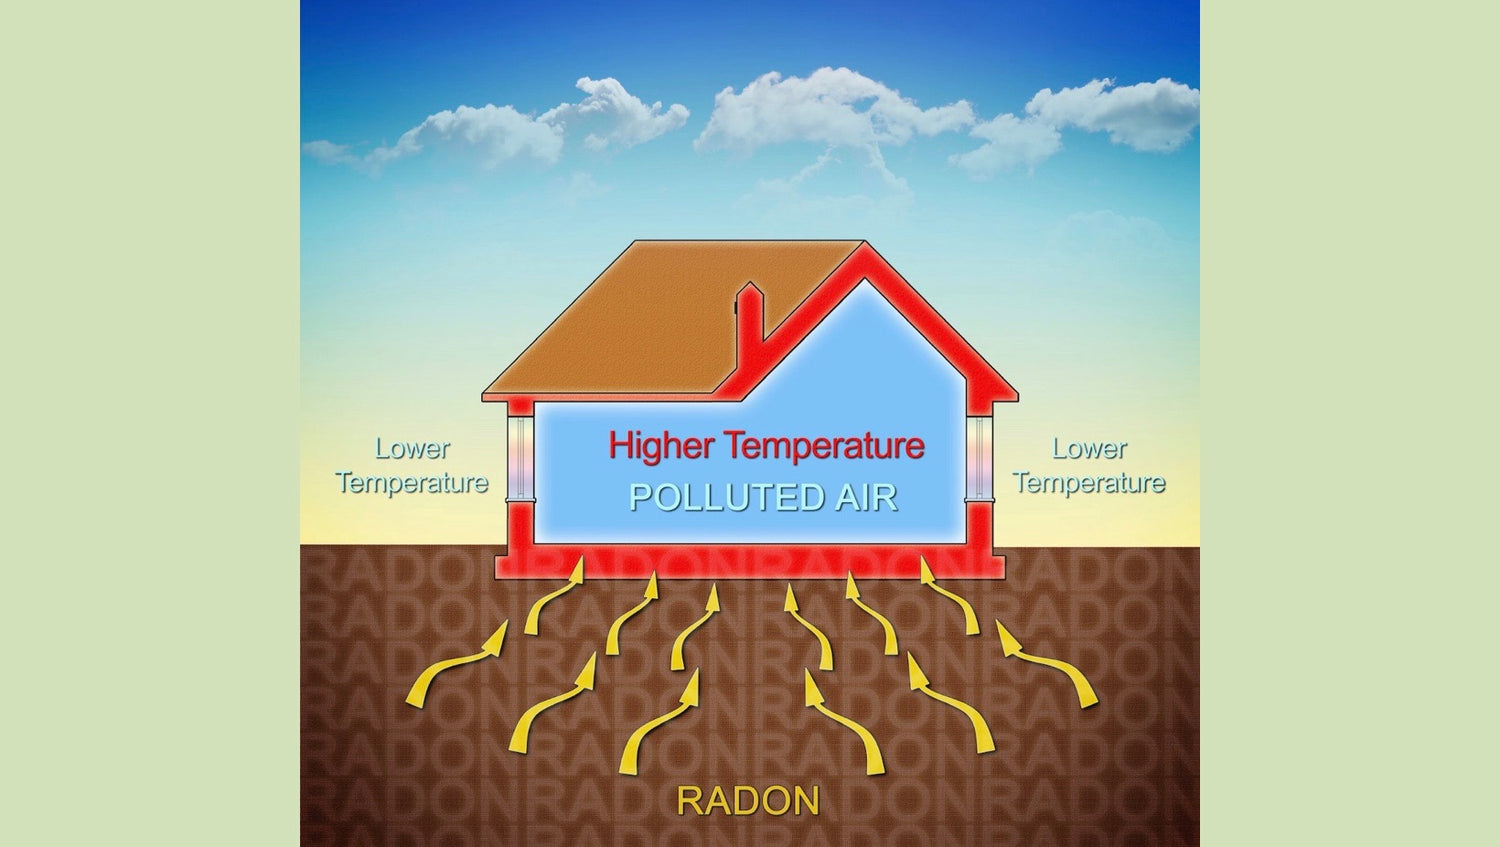 Everything You Need to Know About Radon in 5 Minutes...